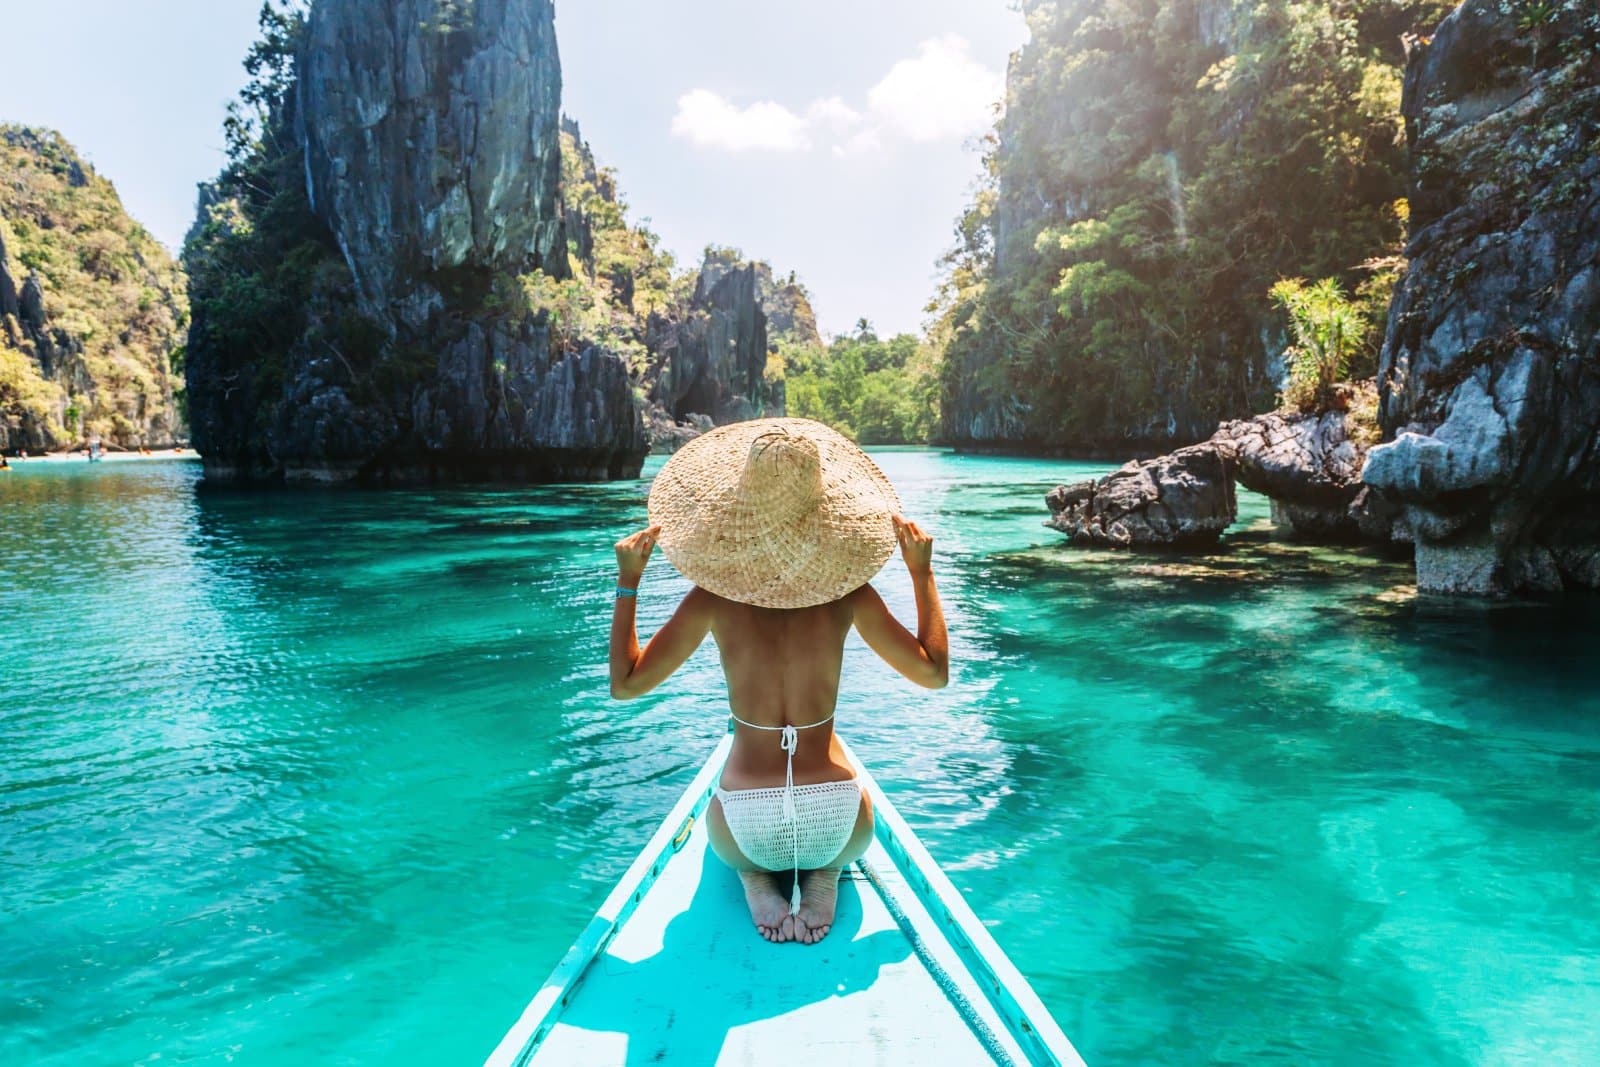 <p class="wp-caption-text">Image Credit: Shutterstock / Alena Ozerova</p>  <p><span>Palawan, often dubbed “The Last Frontier,” is renowned for its untouched natural beauty, stretching from the stunning limestone cliffs of El Nido to the crystal-clear waters of Coron. This island serves as a sanctuary for diverse marine and terrestrial wildlife and hosts some of the most picturesque landscapes in the Philippines. Its crown jewel, the Underground River in Puerto Princesa, is a UNESCO World Heritage Site and one of the New 7 Wonders of Nature, offering an extraordinary experience as you navigate through its majestic cave systems.</span></p>